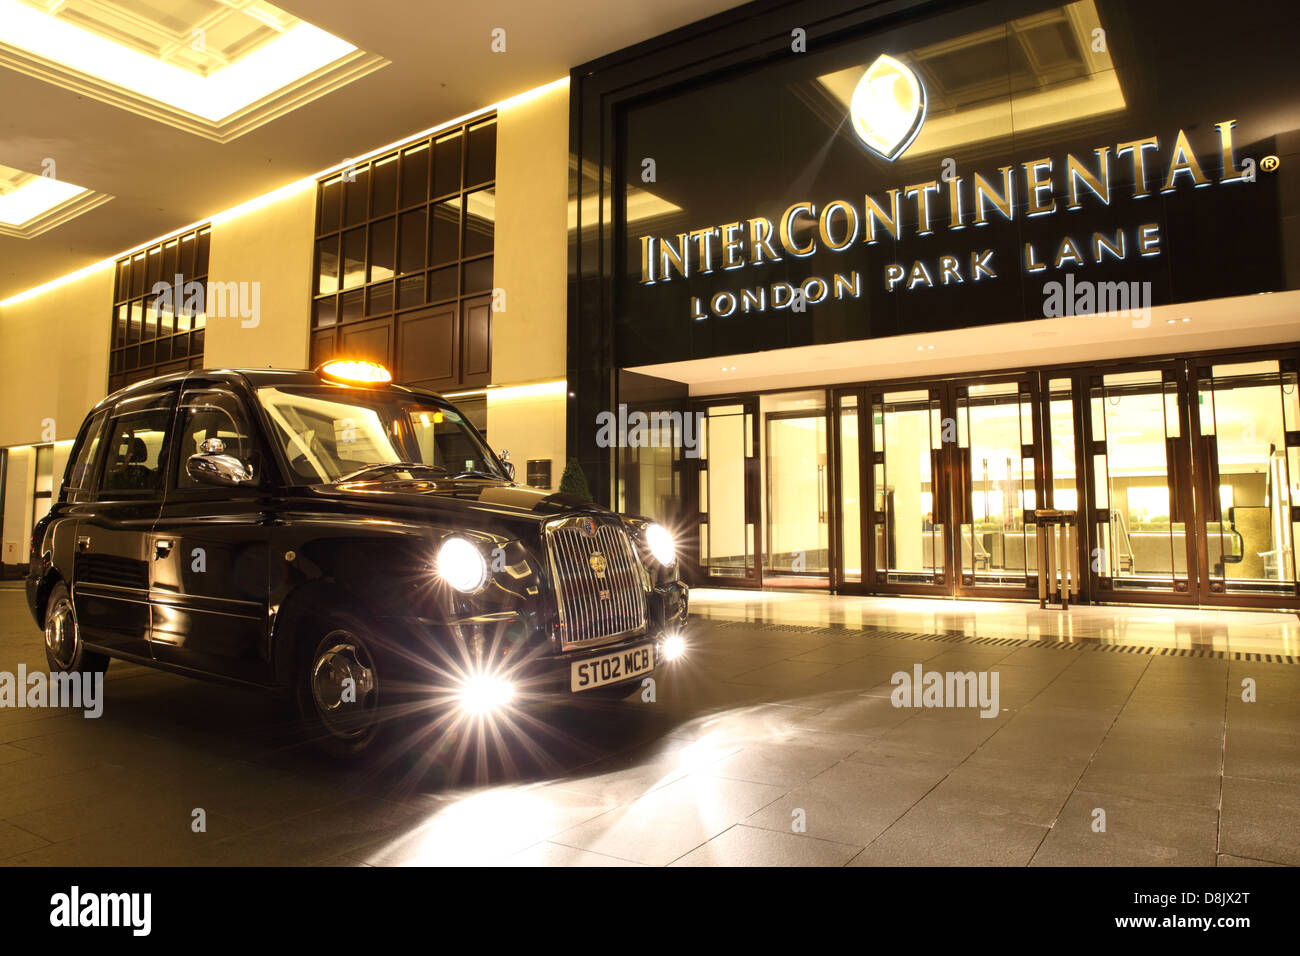 London Taxi, Black Cab, parked in the forecourt of the Intercontinental Hotel Park Lane Stock Photo